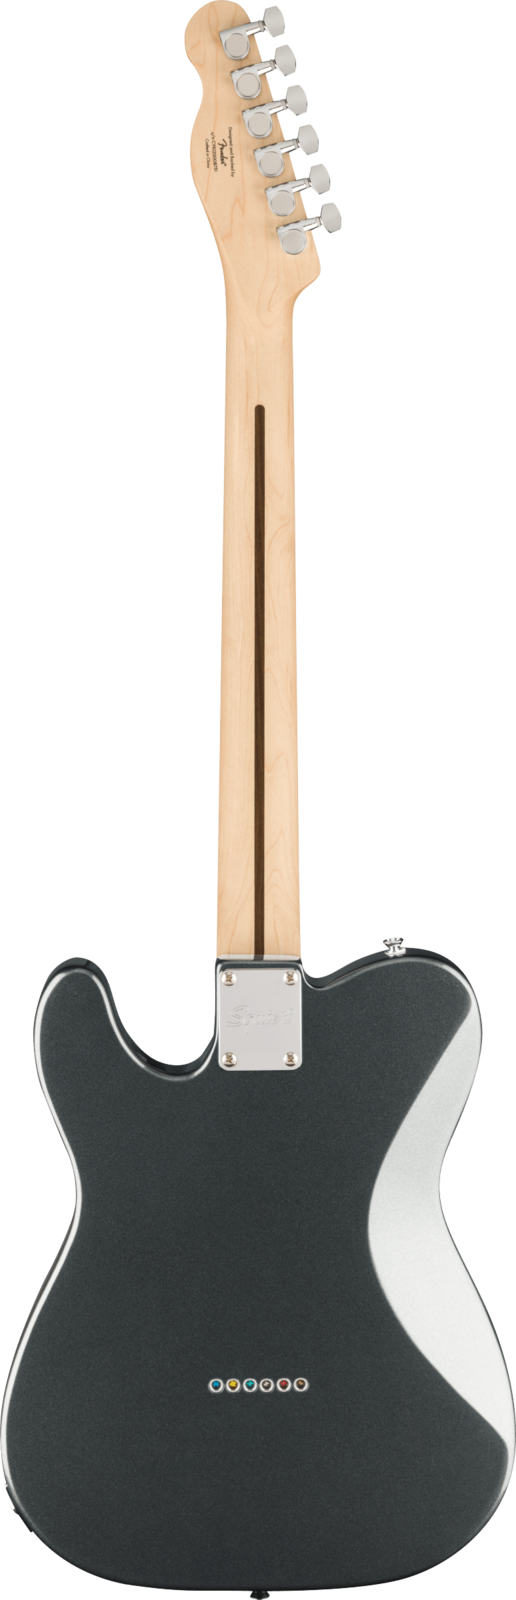 Squier Affinity Telecaster Deluxe Charcoal Frost Metallic